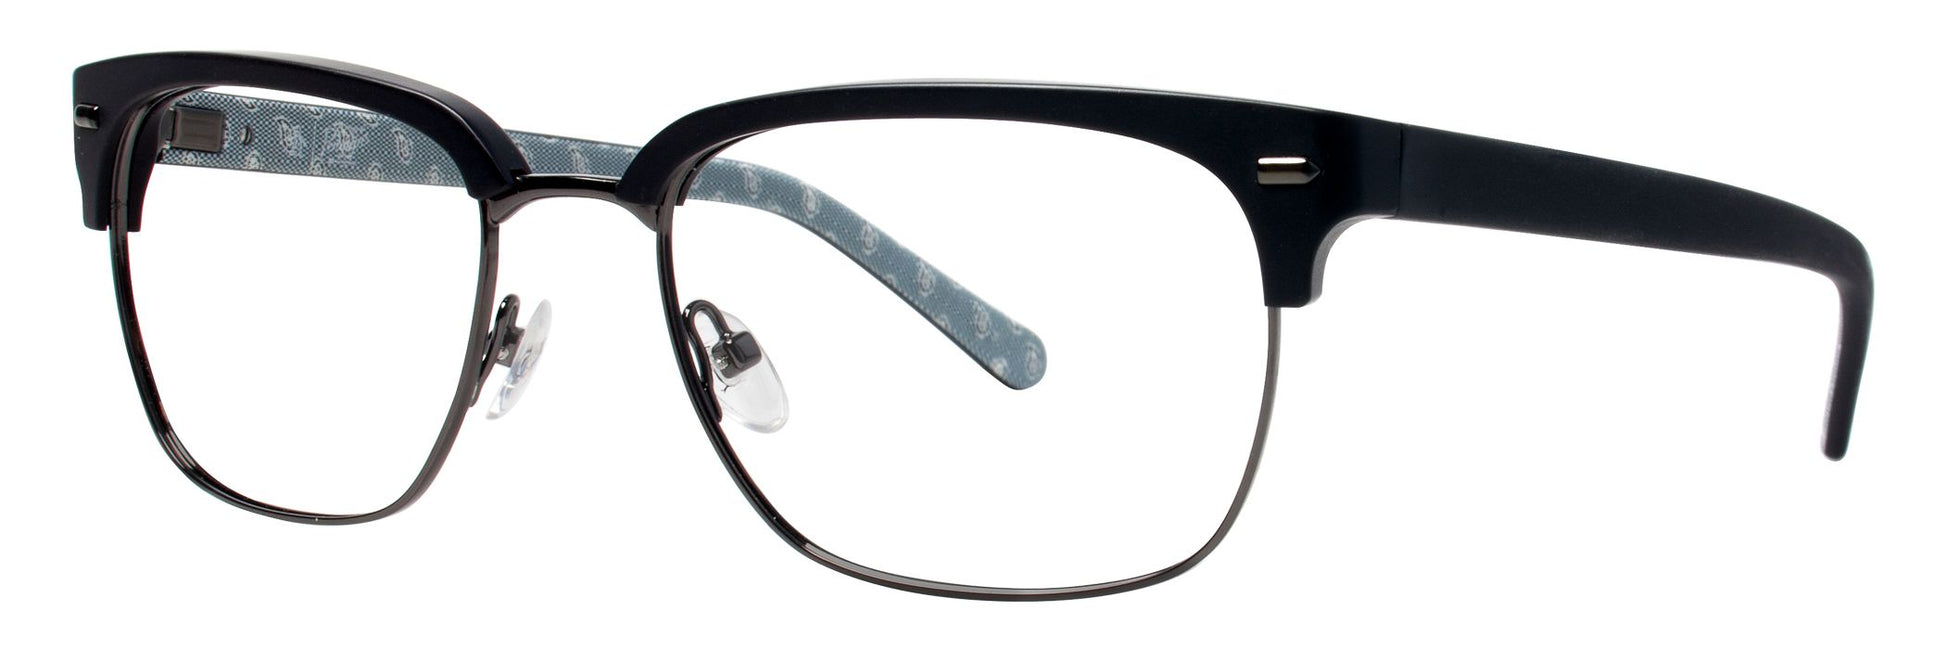 Men’s prescription eyewear - A side view of the Sly model in black. The rectangular frame is made of acetate and metal